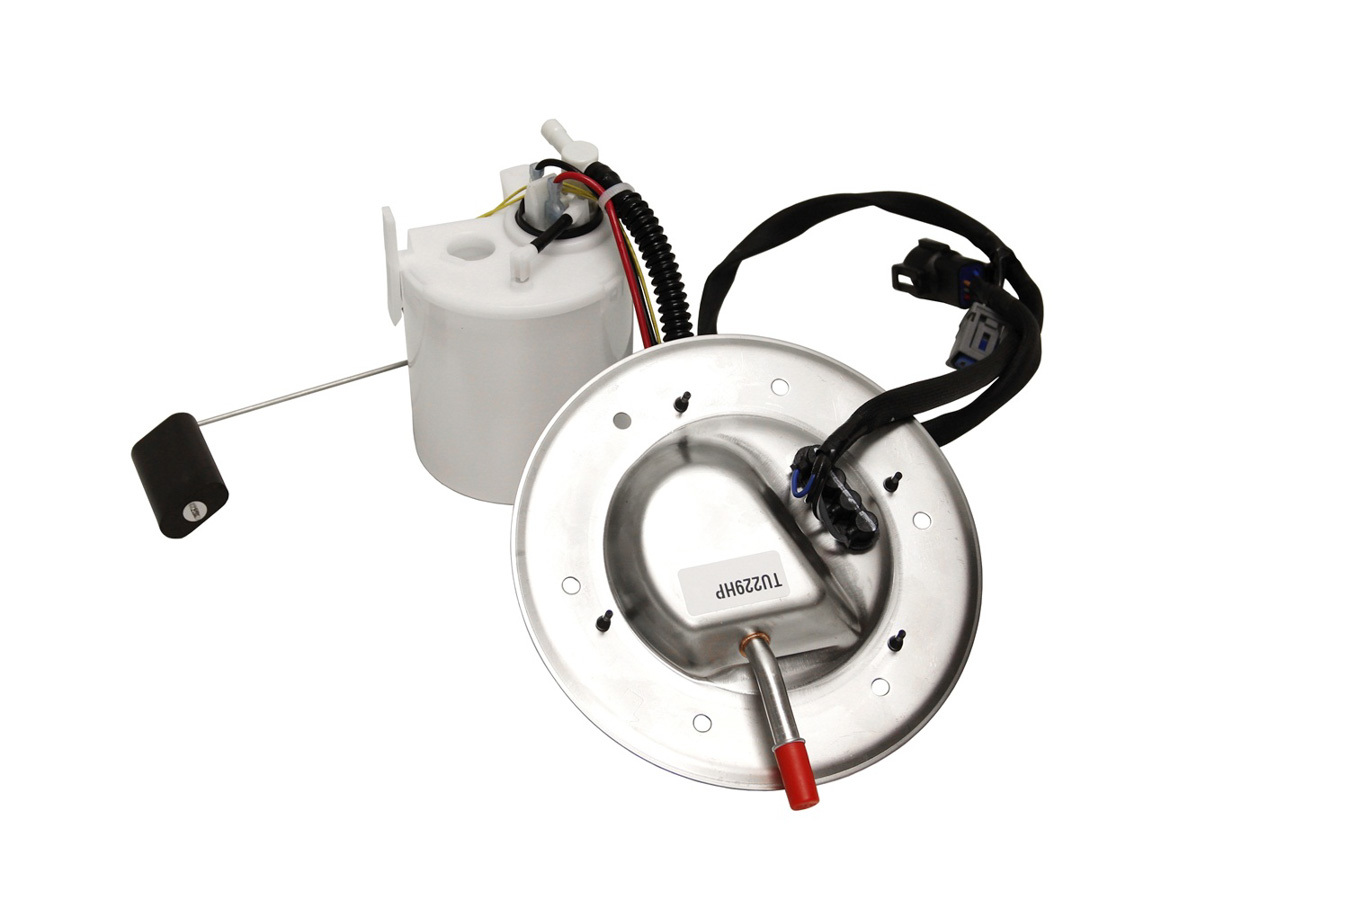 BBK Performance 1863 Fuel Pump, Electric, In-Tank, 300 lph, Install Kit, Gas, Ford Mustang 2001-04, Kit